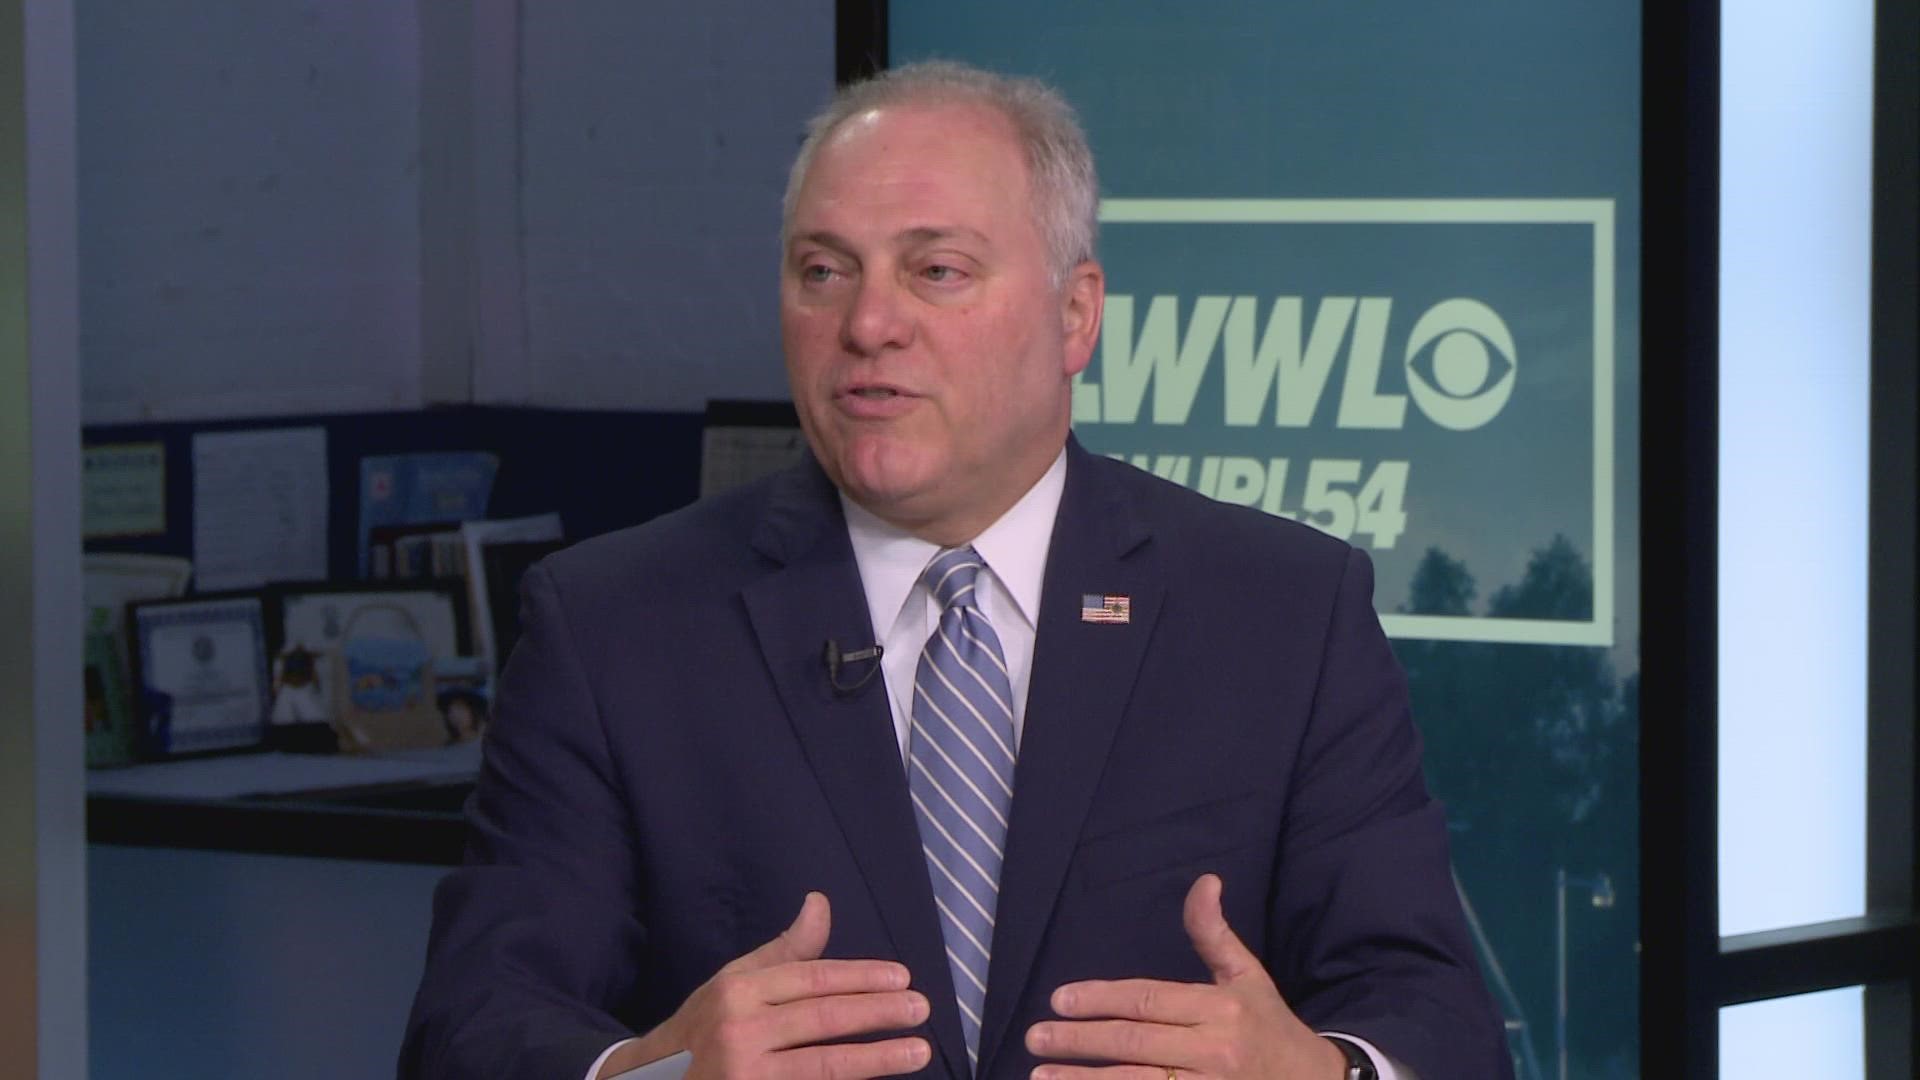 House Minority Whip Steve Scalise joins WWLTV to discuss upcoming election.